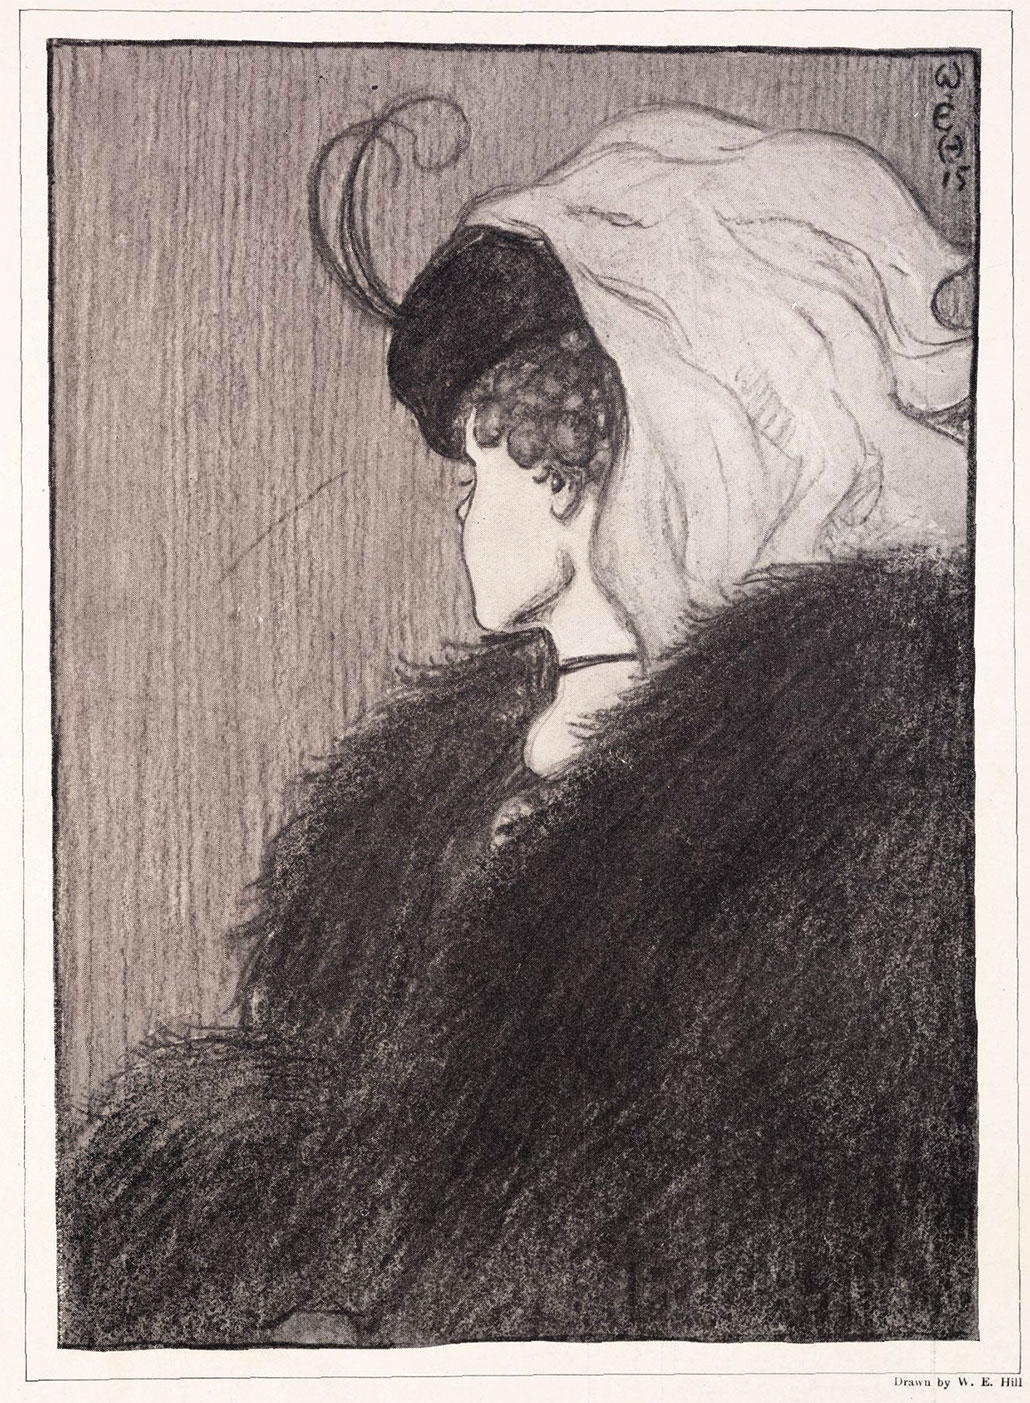 a drawing that shows a young woman or an old woman in profile, an optical illusion